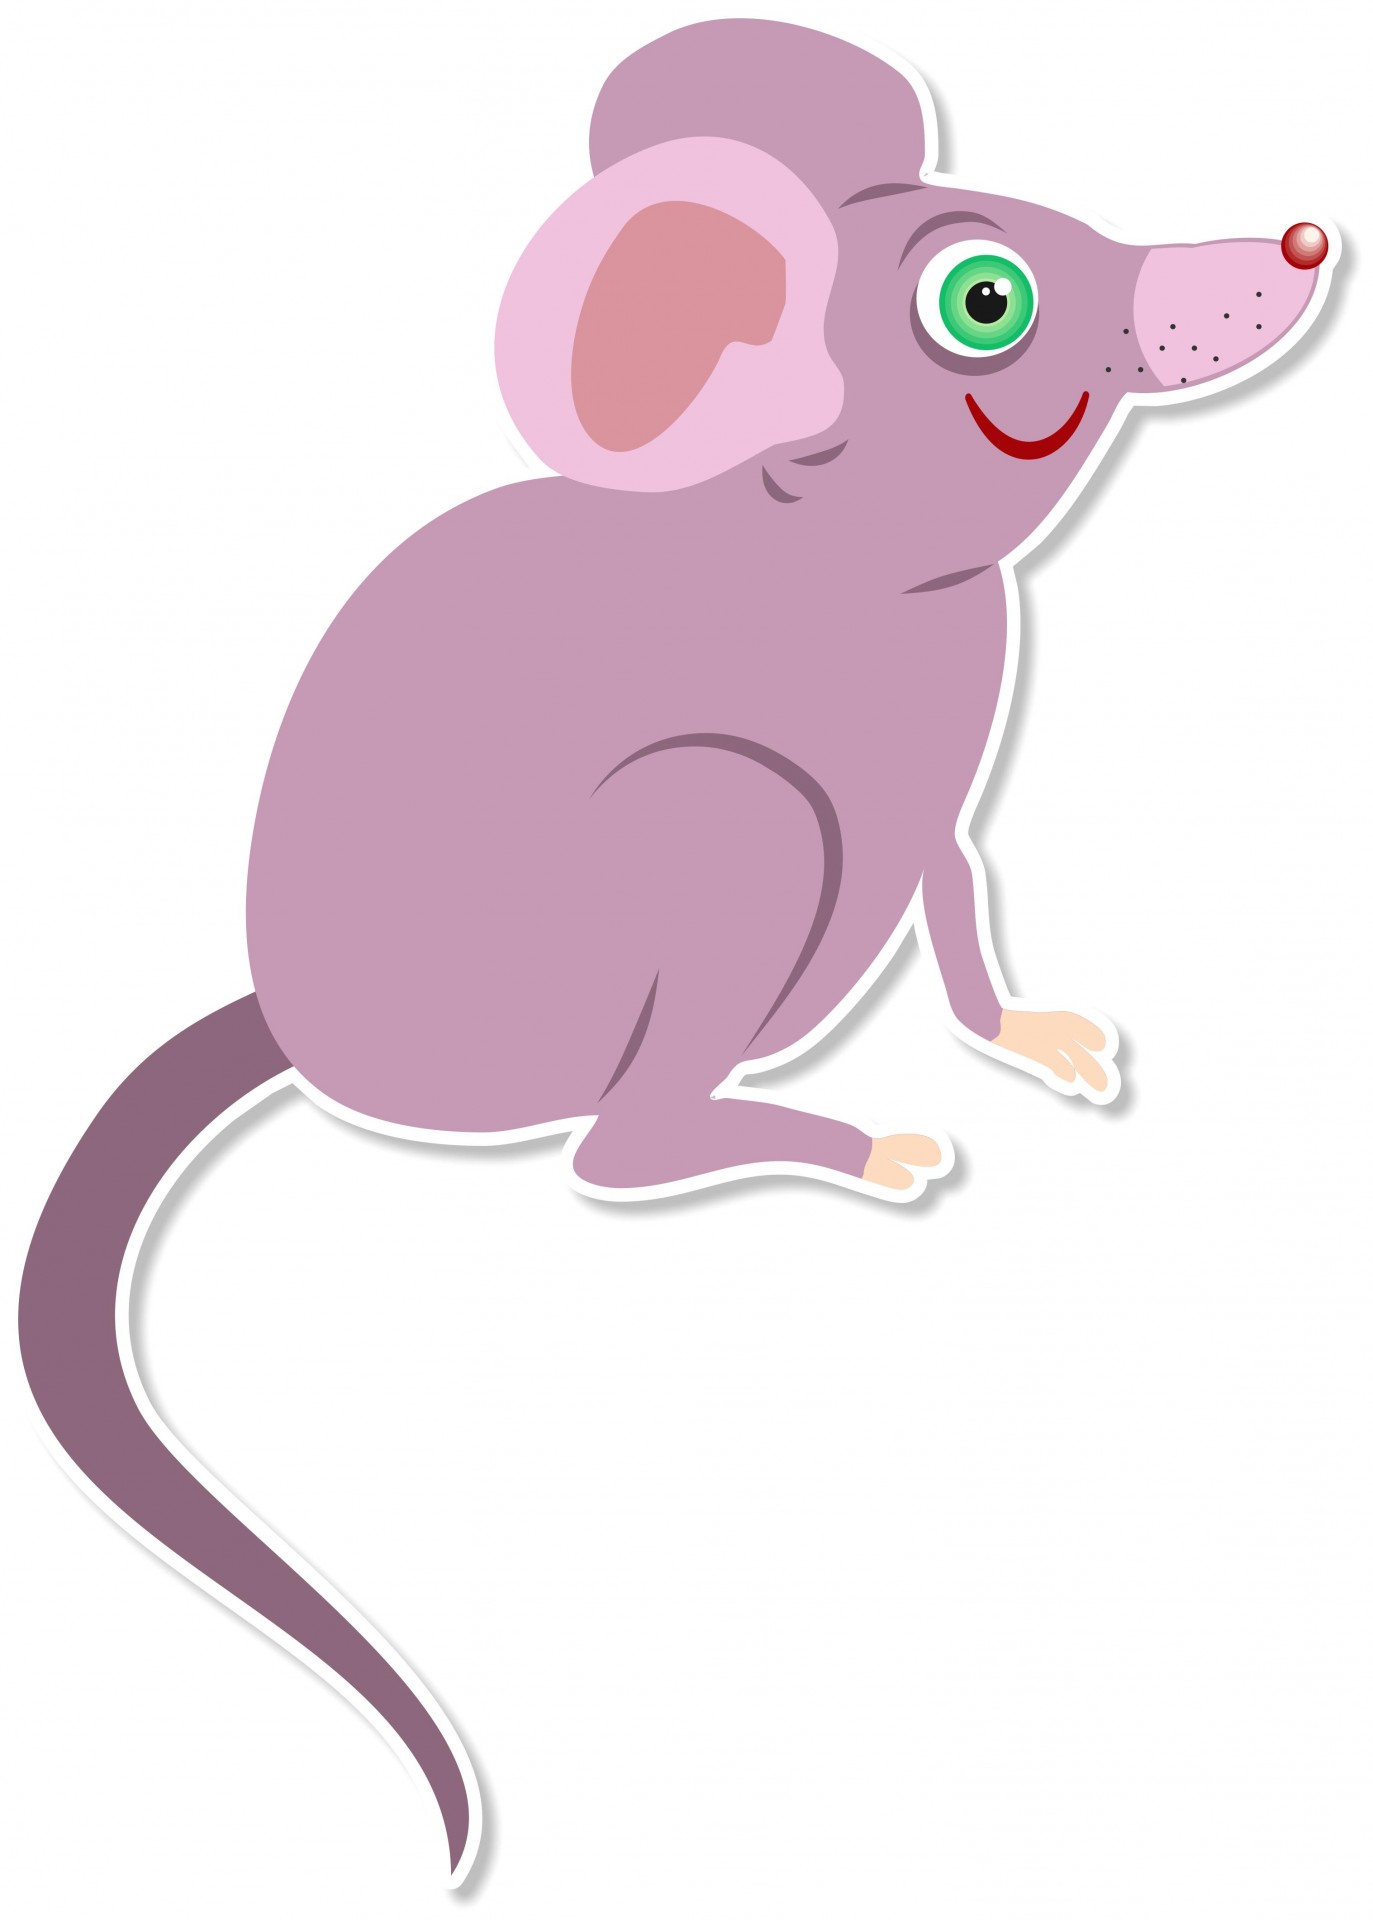 free clipart of mouse - photo #44